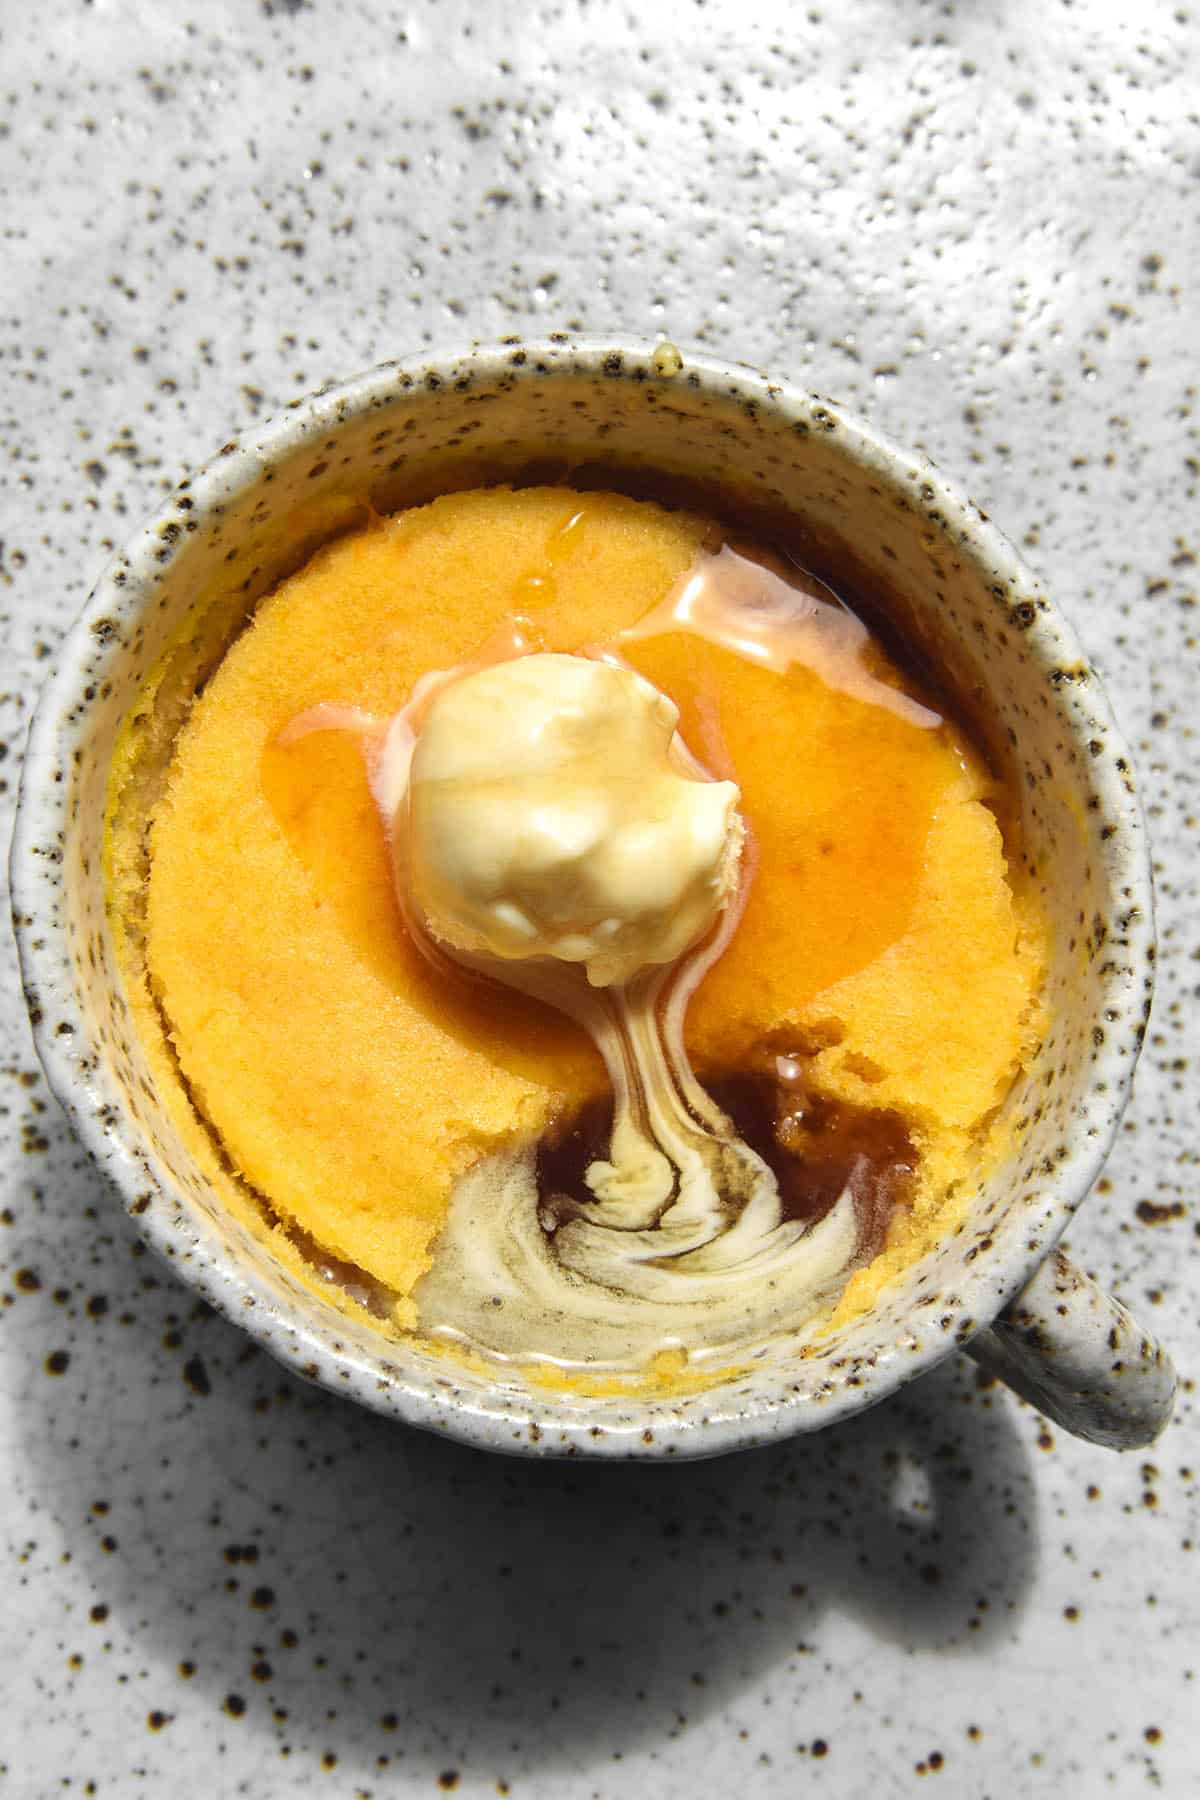 A gluten free pumpkin mug cake in a white speckled ceramic mug on a white speckled ceramic plate. The mug cake is a bright orange, bathed in sunlight. It is topped with melting ice cream and maple syrup that pools together in the hole where a spoon of mug cake has been eaten. 